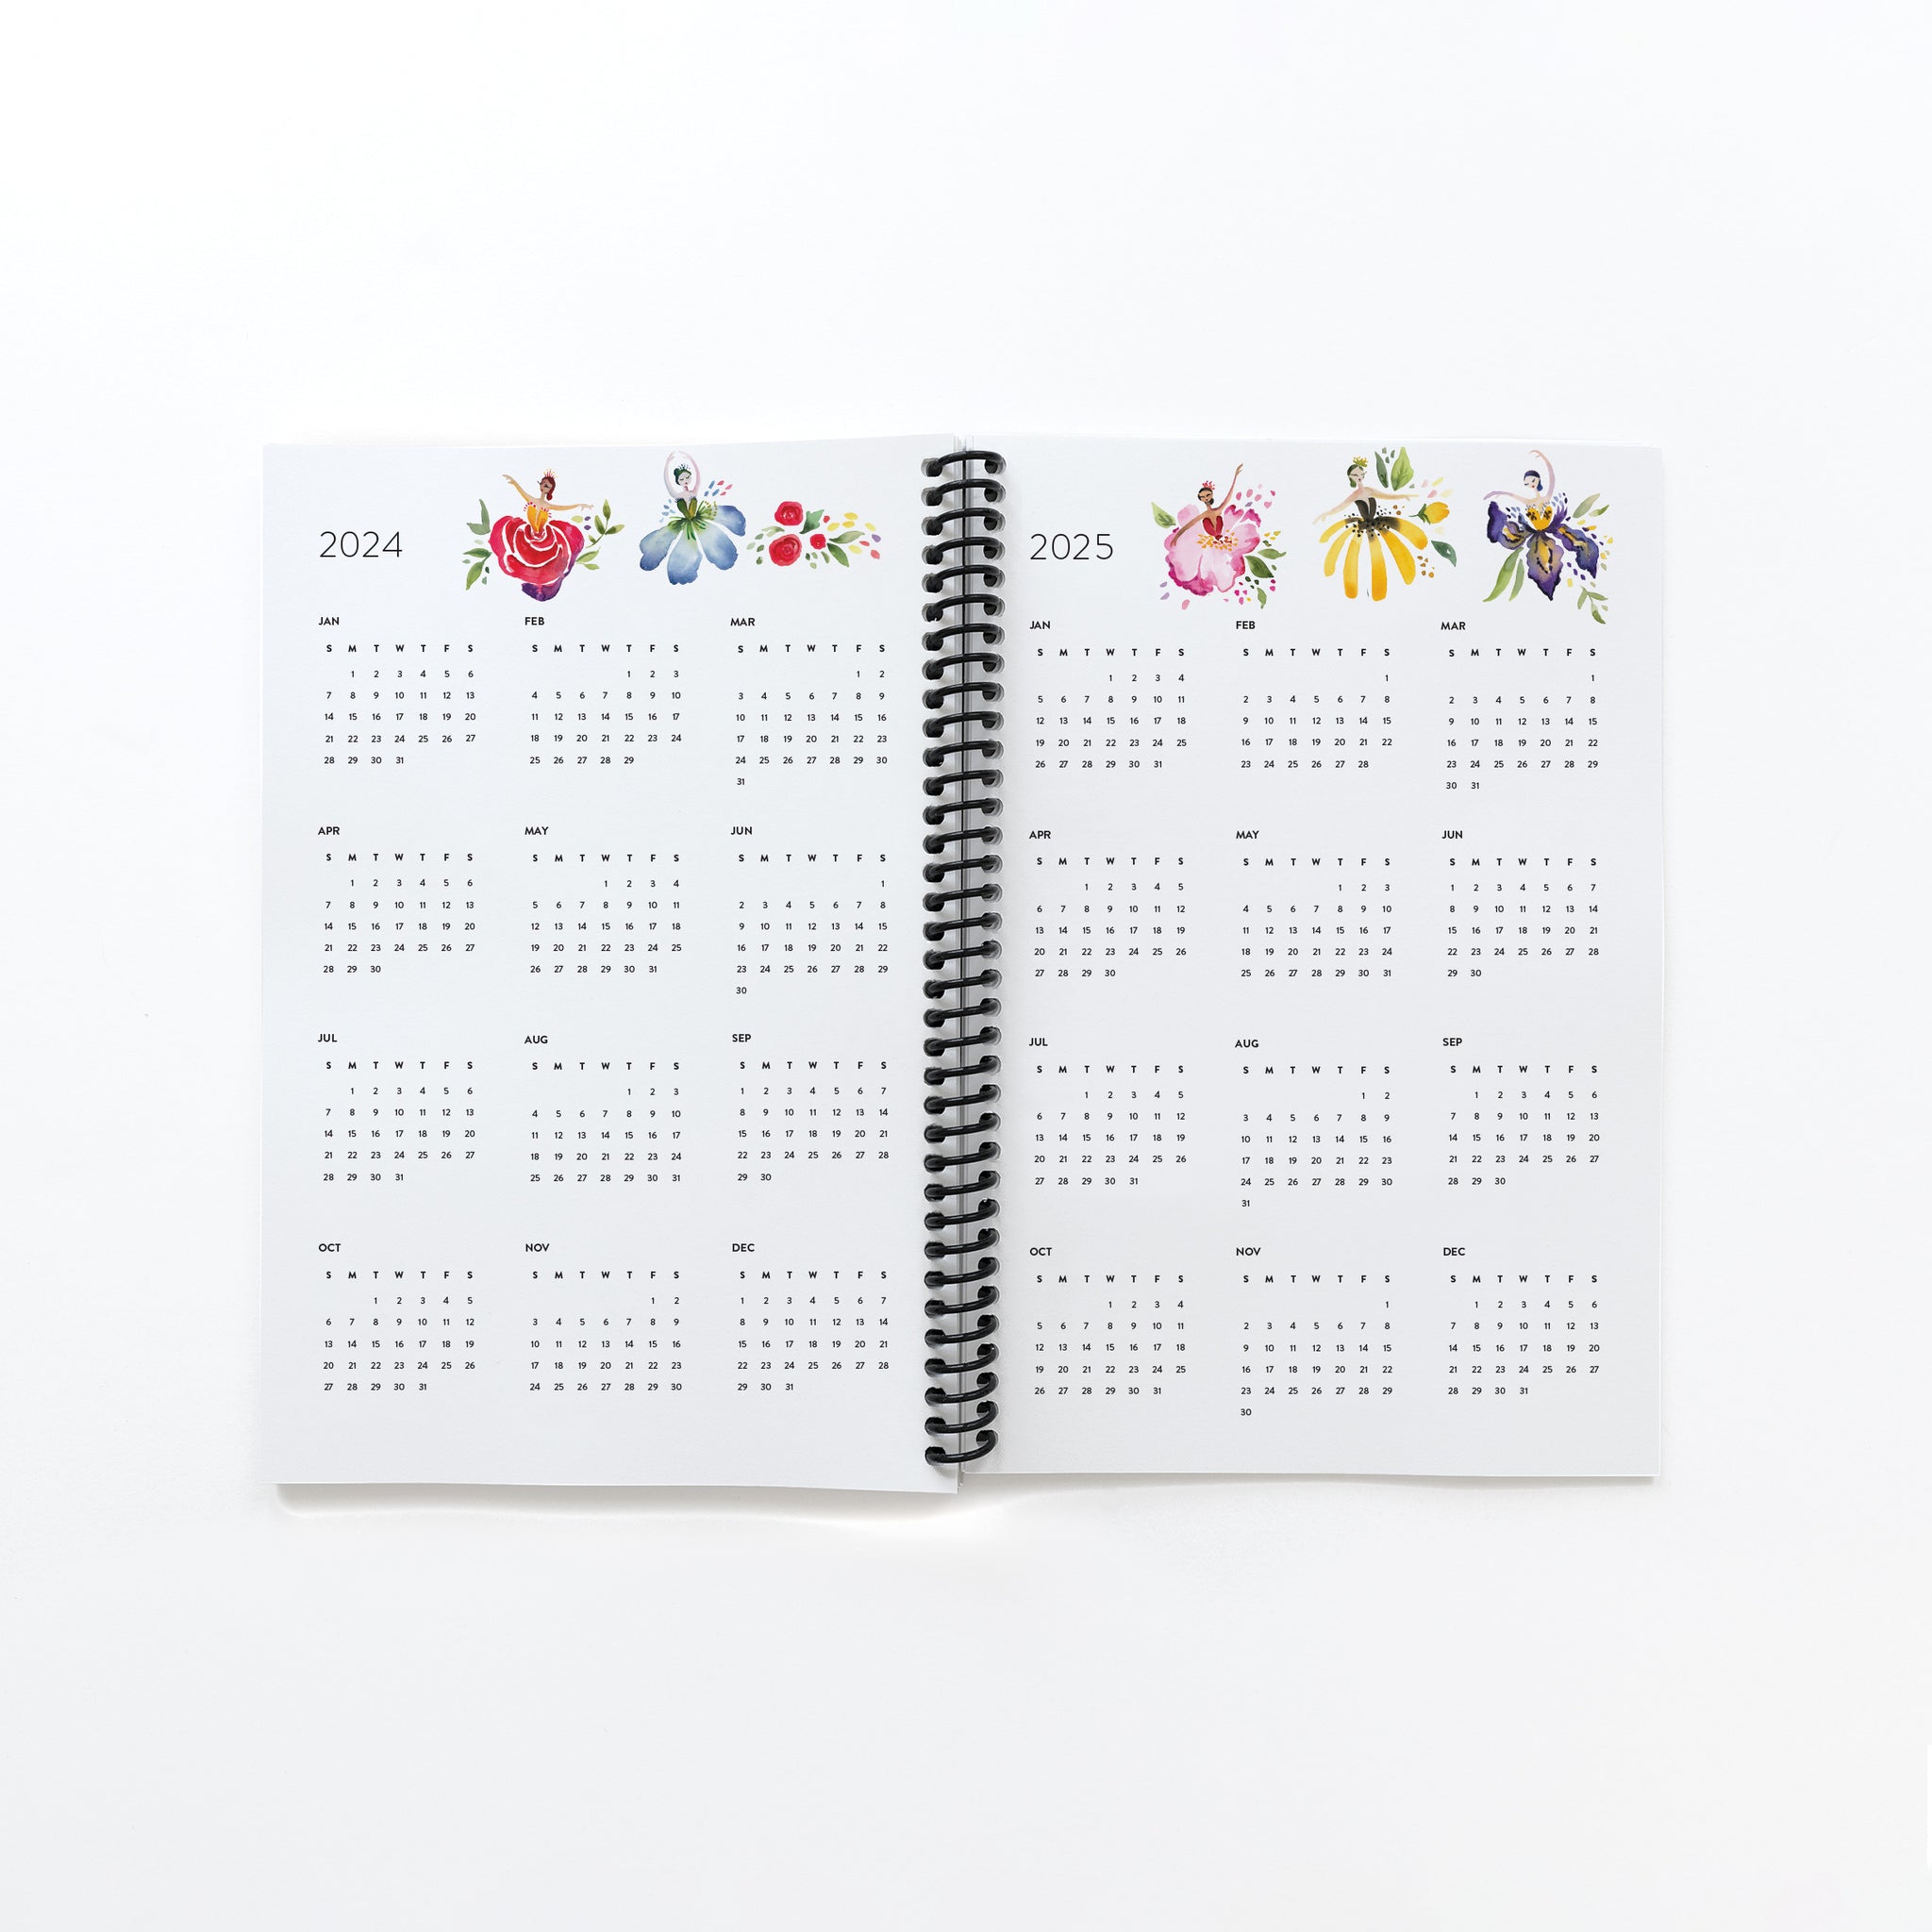 Waltz of the Flowers 2024 Planner